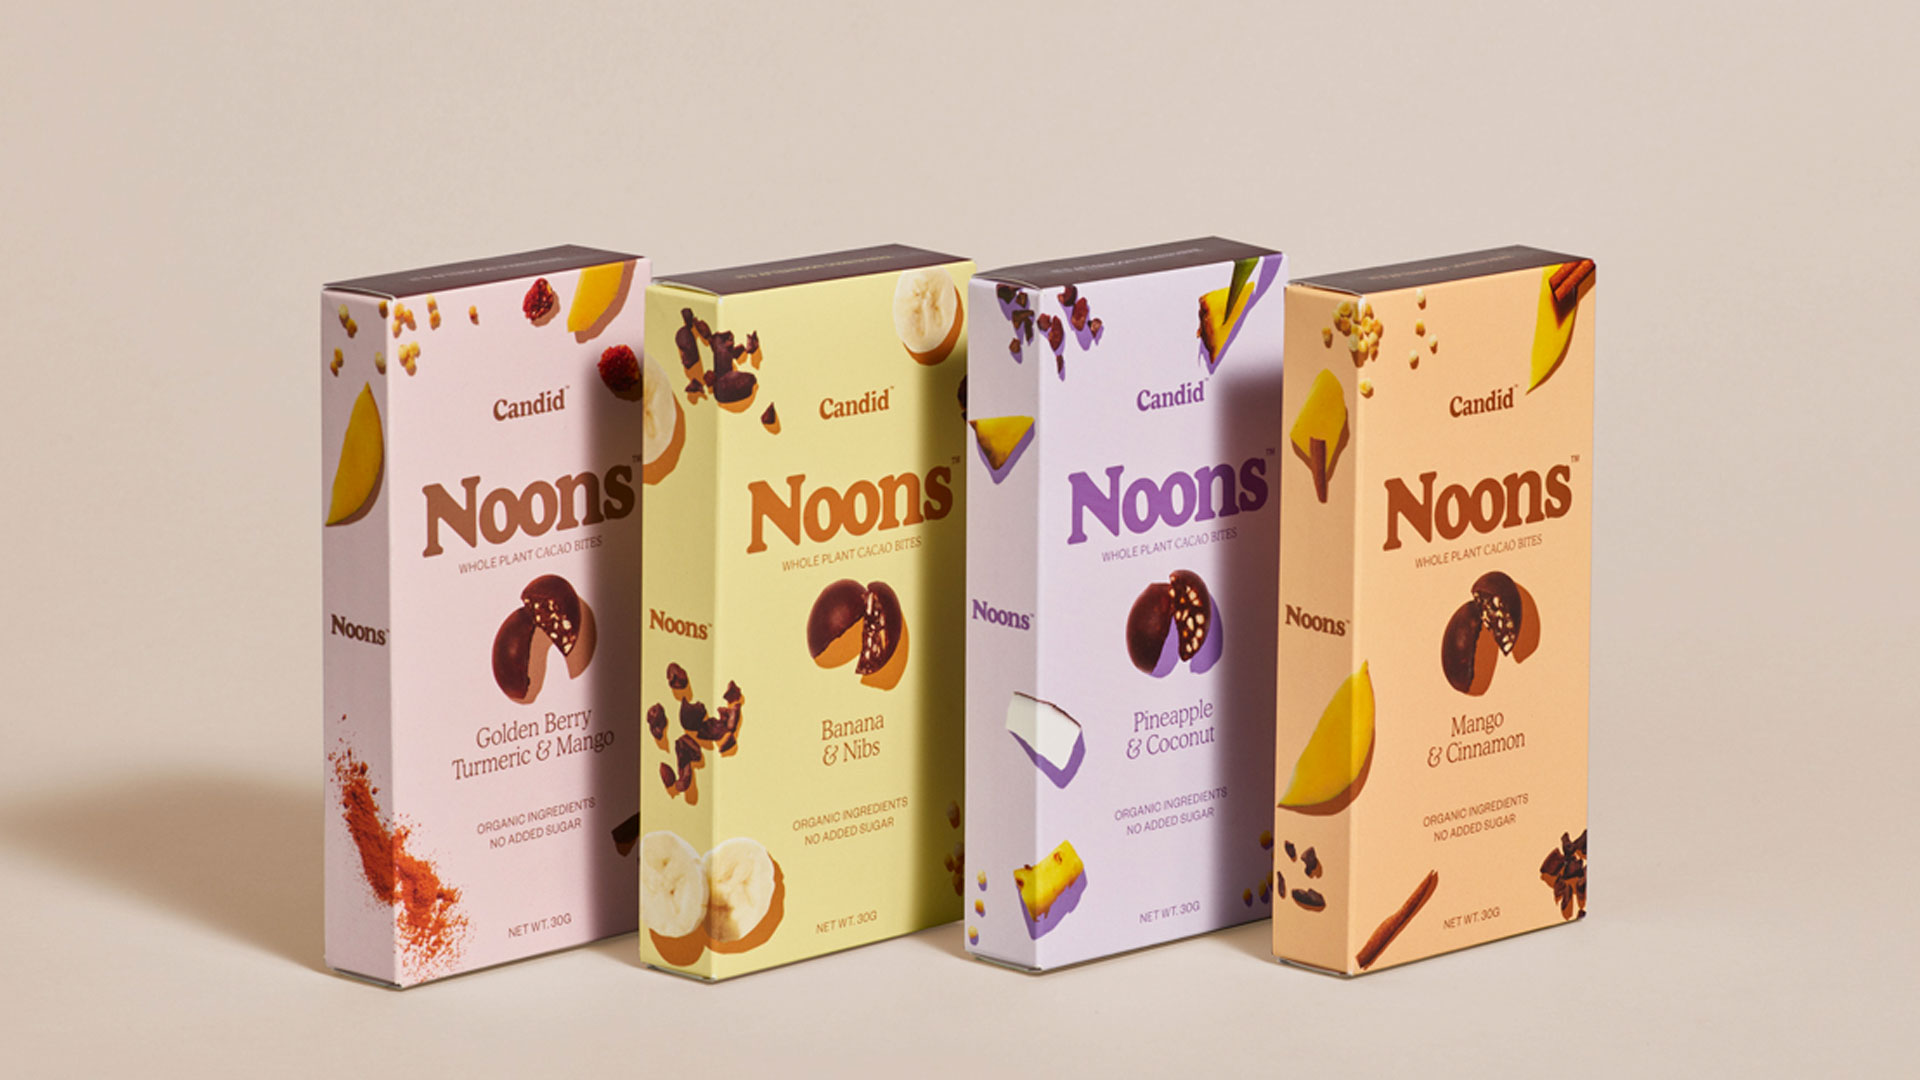 Four boxes of the flavors of Candid Noons stood up next to each other.